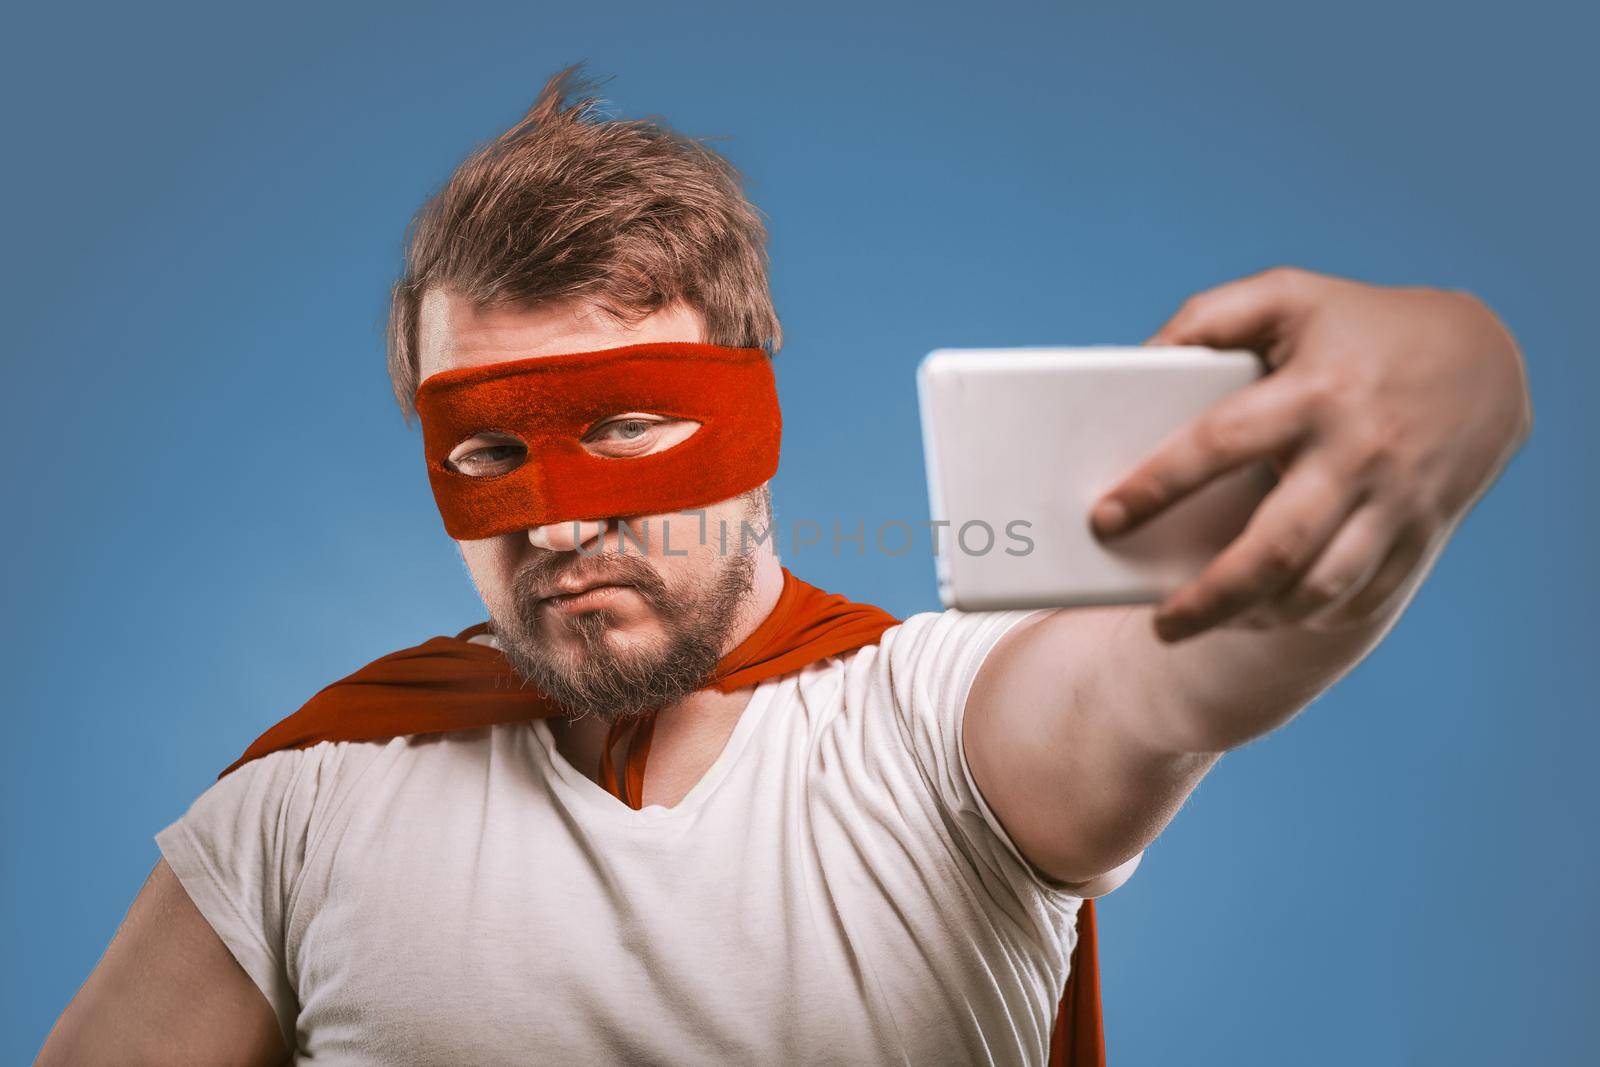 Super hero man takes selfie by mobile phones. Confident man in a super hero costume in a red mask and cloak poses on faded denim blue background making selfie photos on smartphone by LipikStockMedia